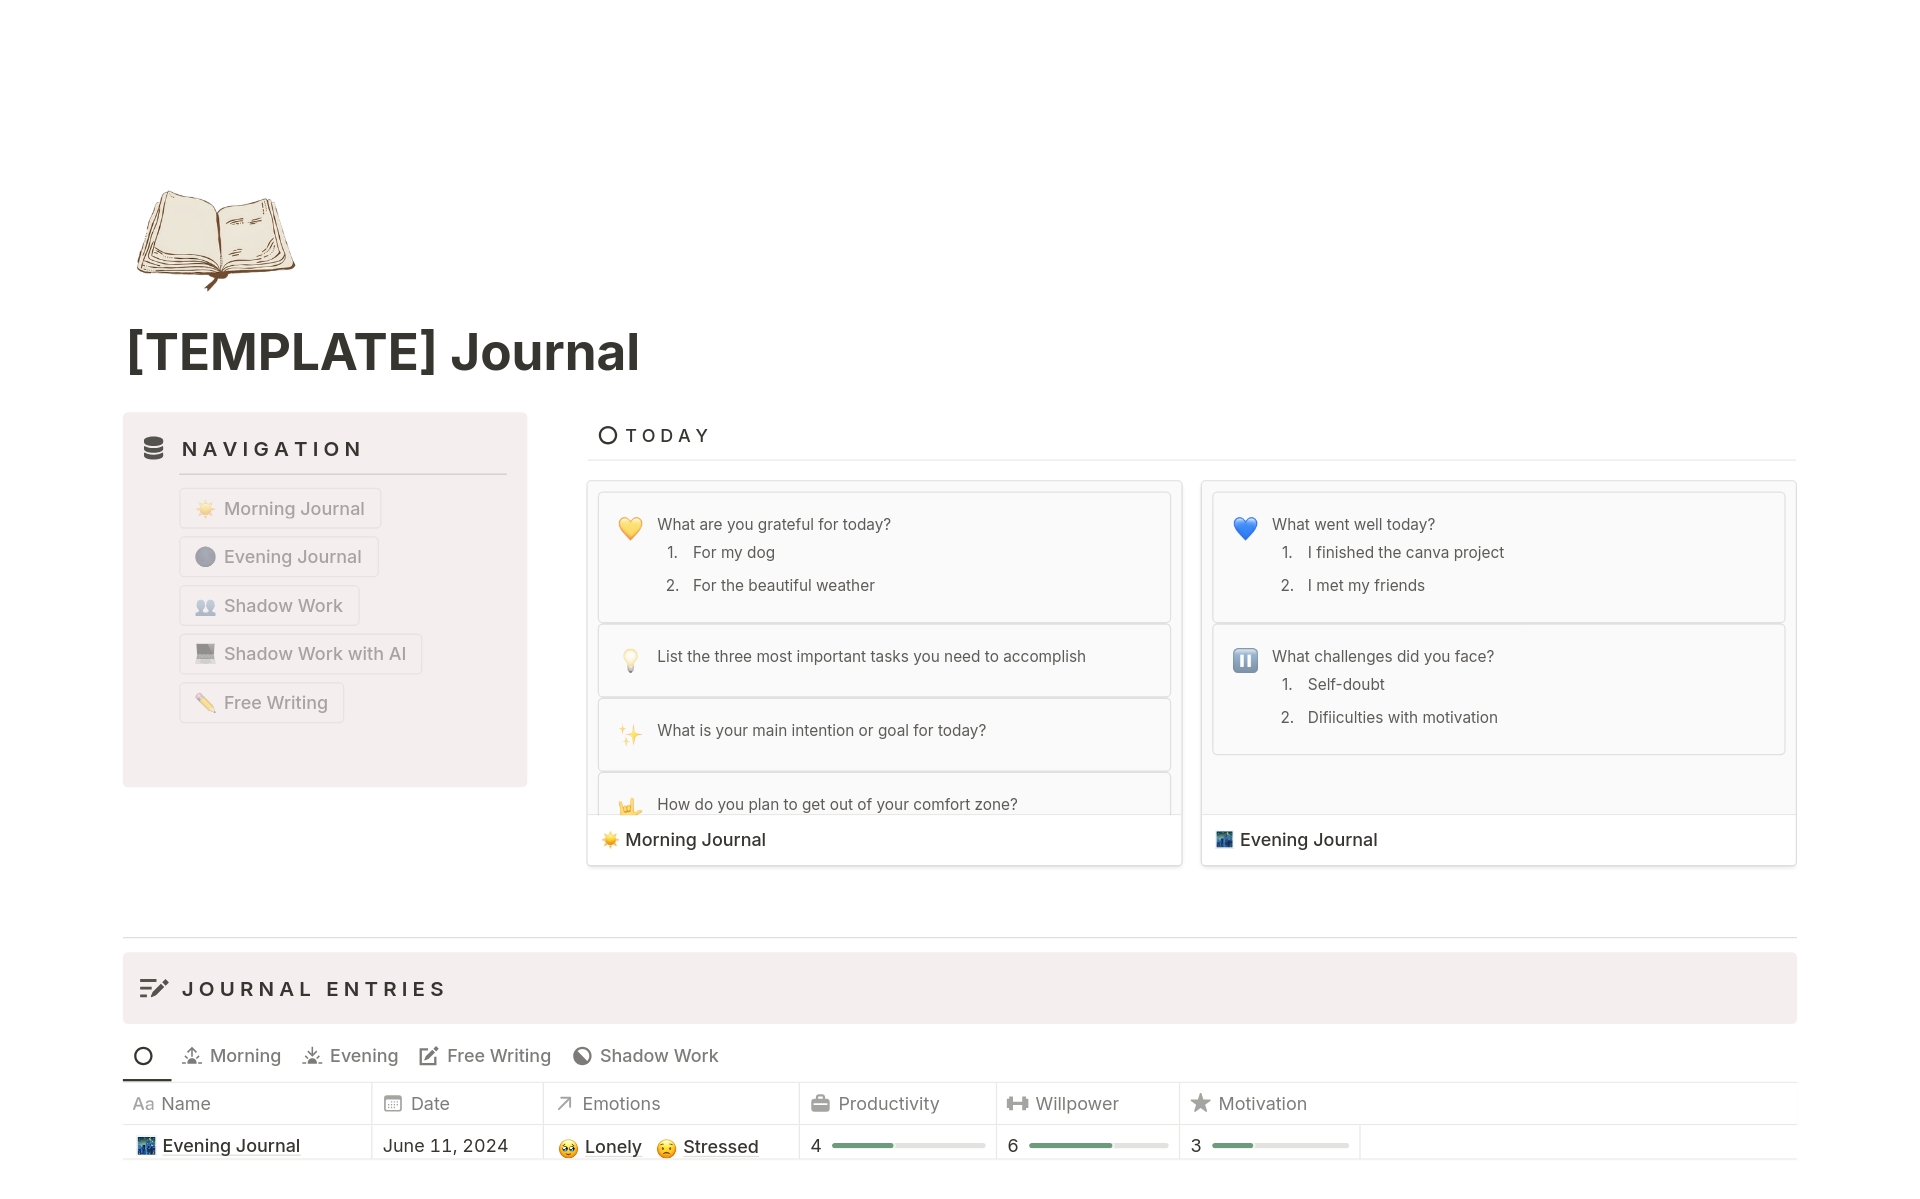 Unlock your potential with "A Guided Journal for Mindfulness and Productivity." This Notion template features daily prompts, AI-assisted shadow work, free writing, mood tracking, and productivity graphs. Enhance your well-being and achieve your goals with ease. Try it out!